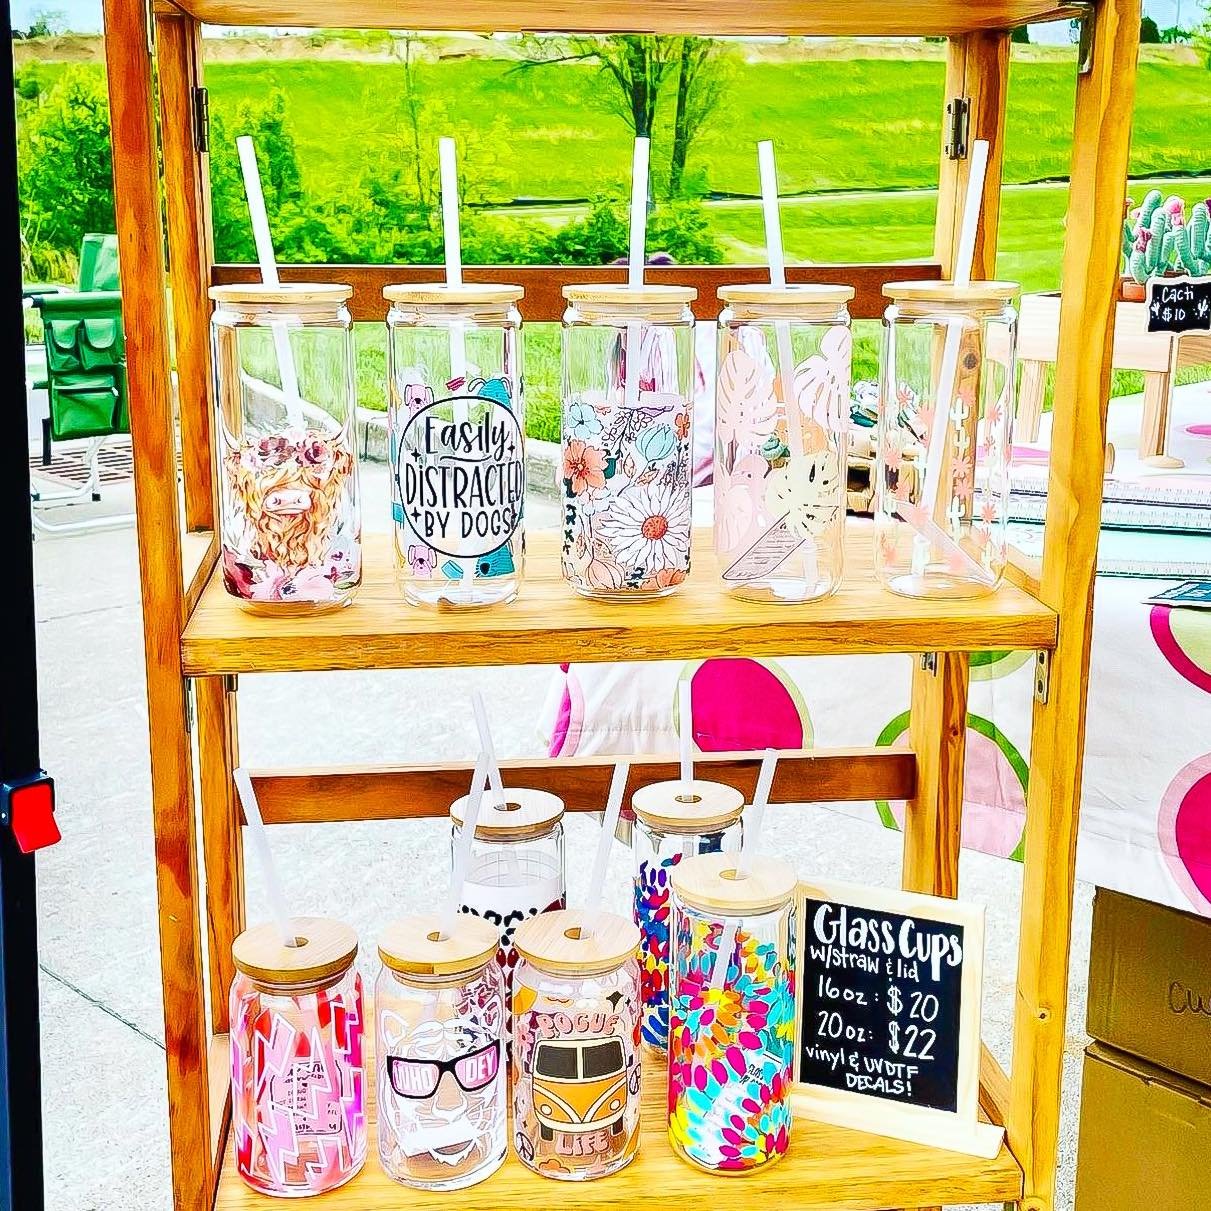 Sip in style with our adorable handmade cups, designed to make every drink an adventure! 🌟
&bull;
@smalltownsparkle 
&bull;
#shoplocalcincinnati #smallbusinesssupport #westsidemarketcincy